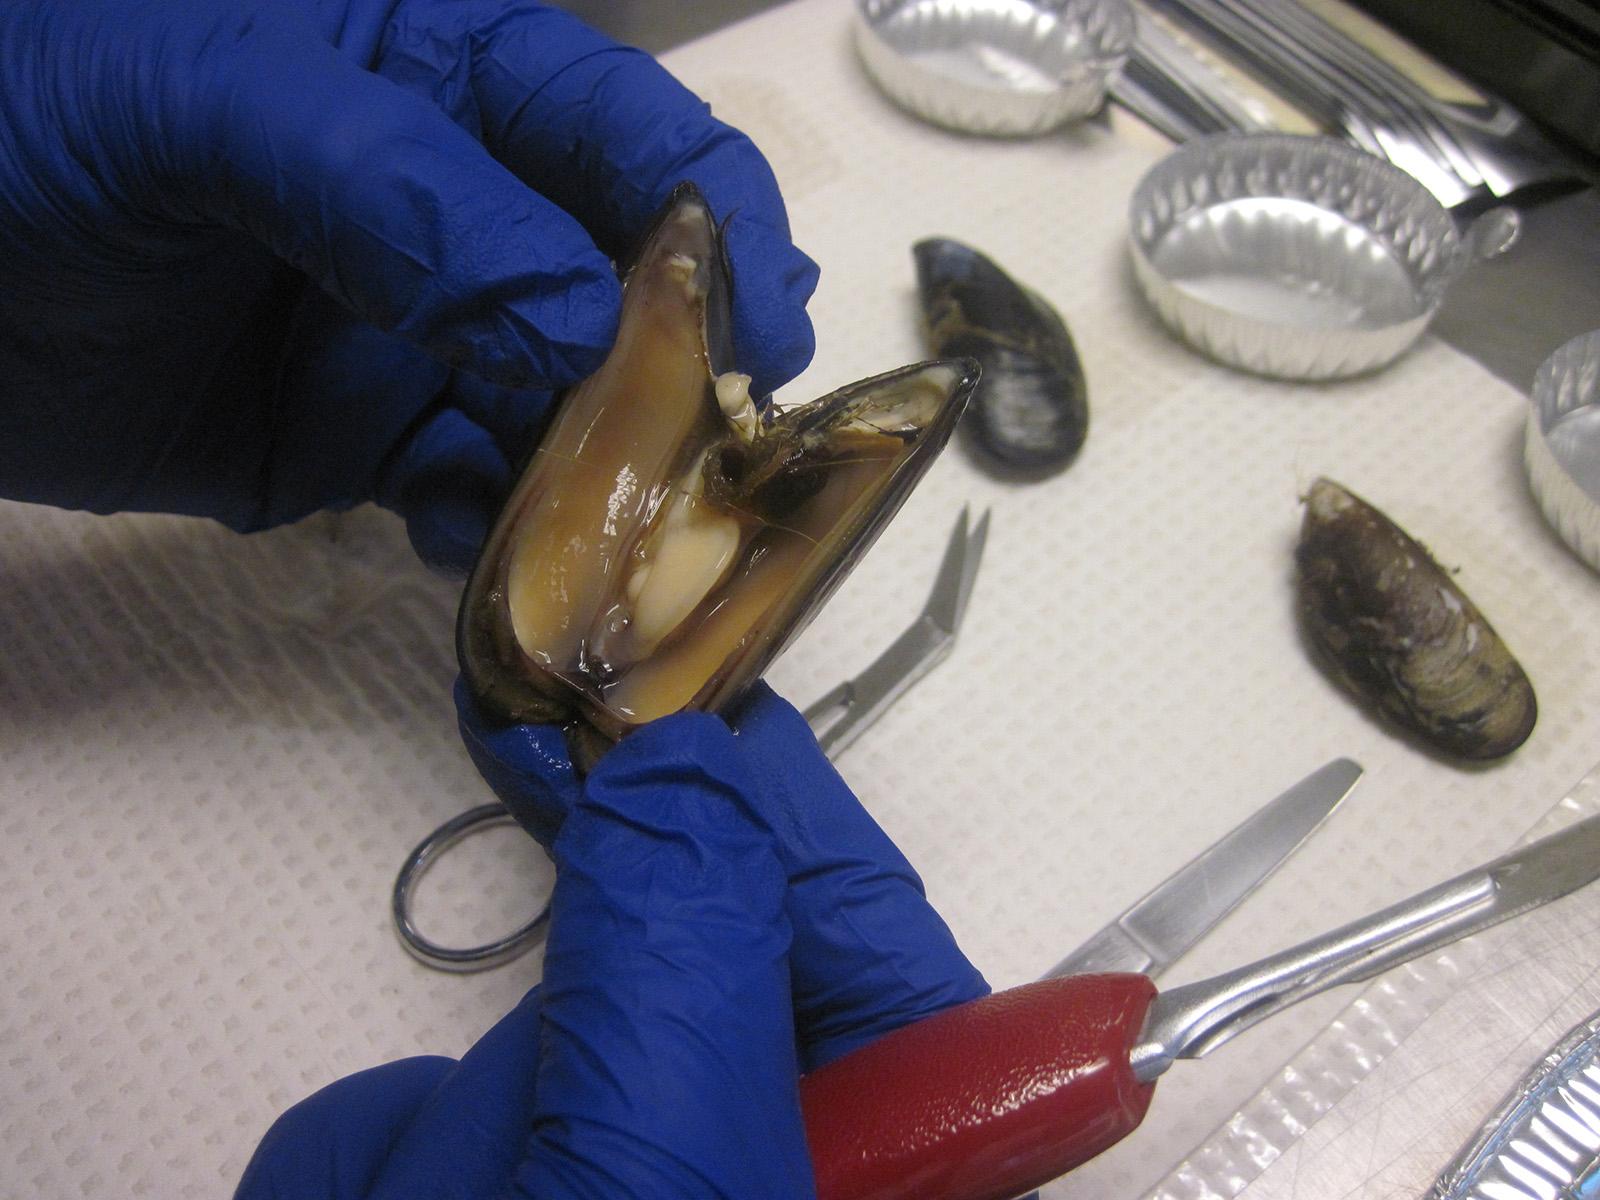 A researcher opens a mussel, showing the inside of the shellfish